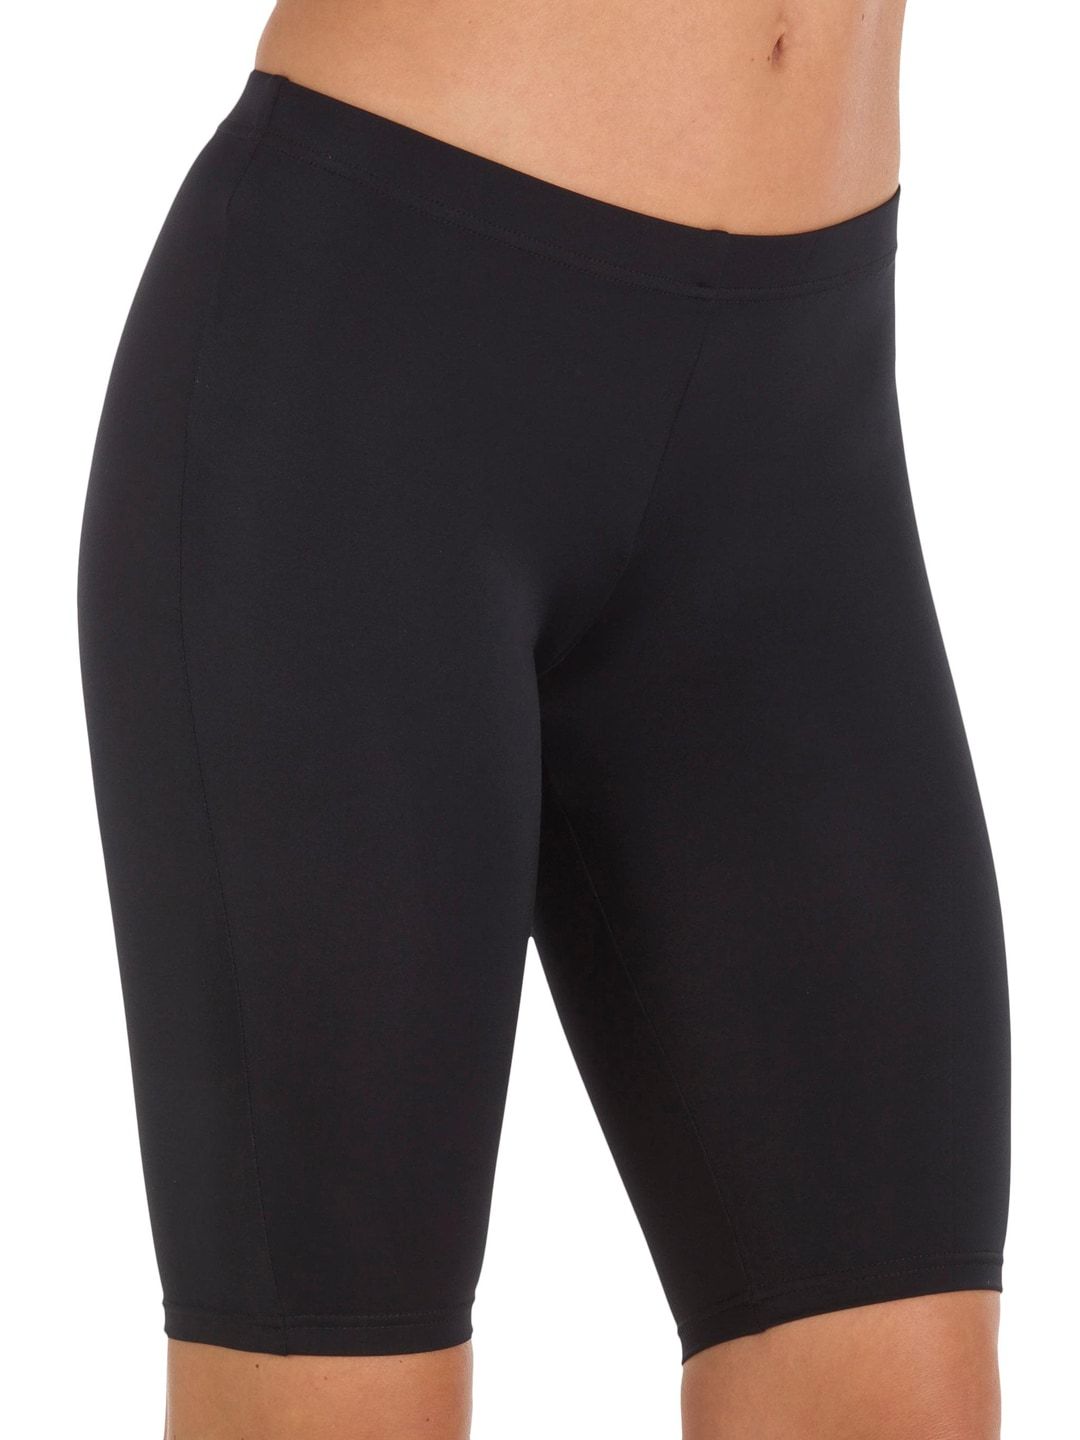 Nabaiji By Decathlon Women Black Solid Long Shorts Price in India